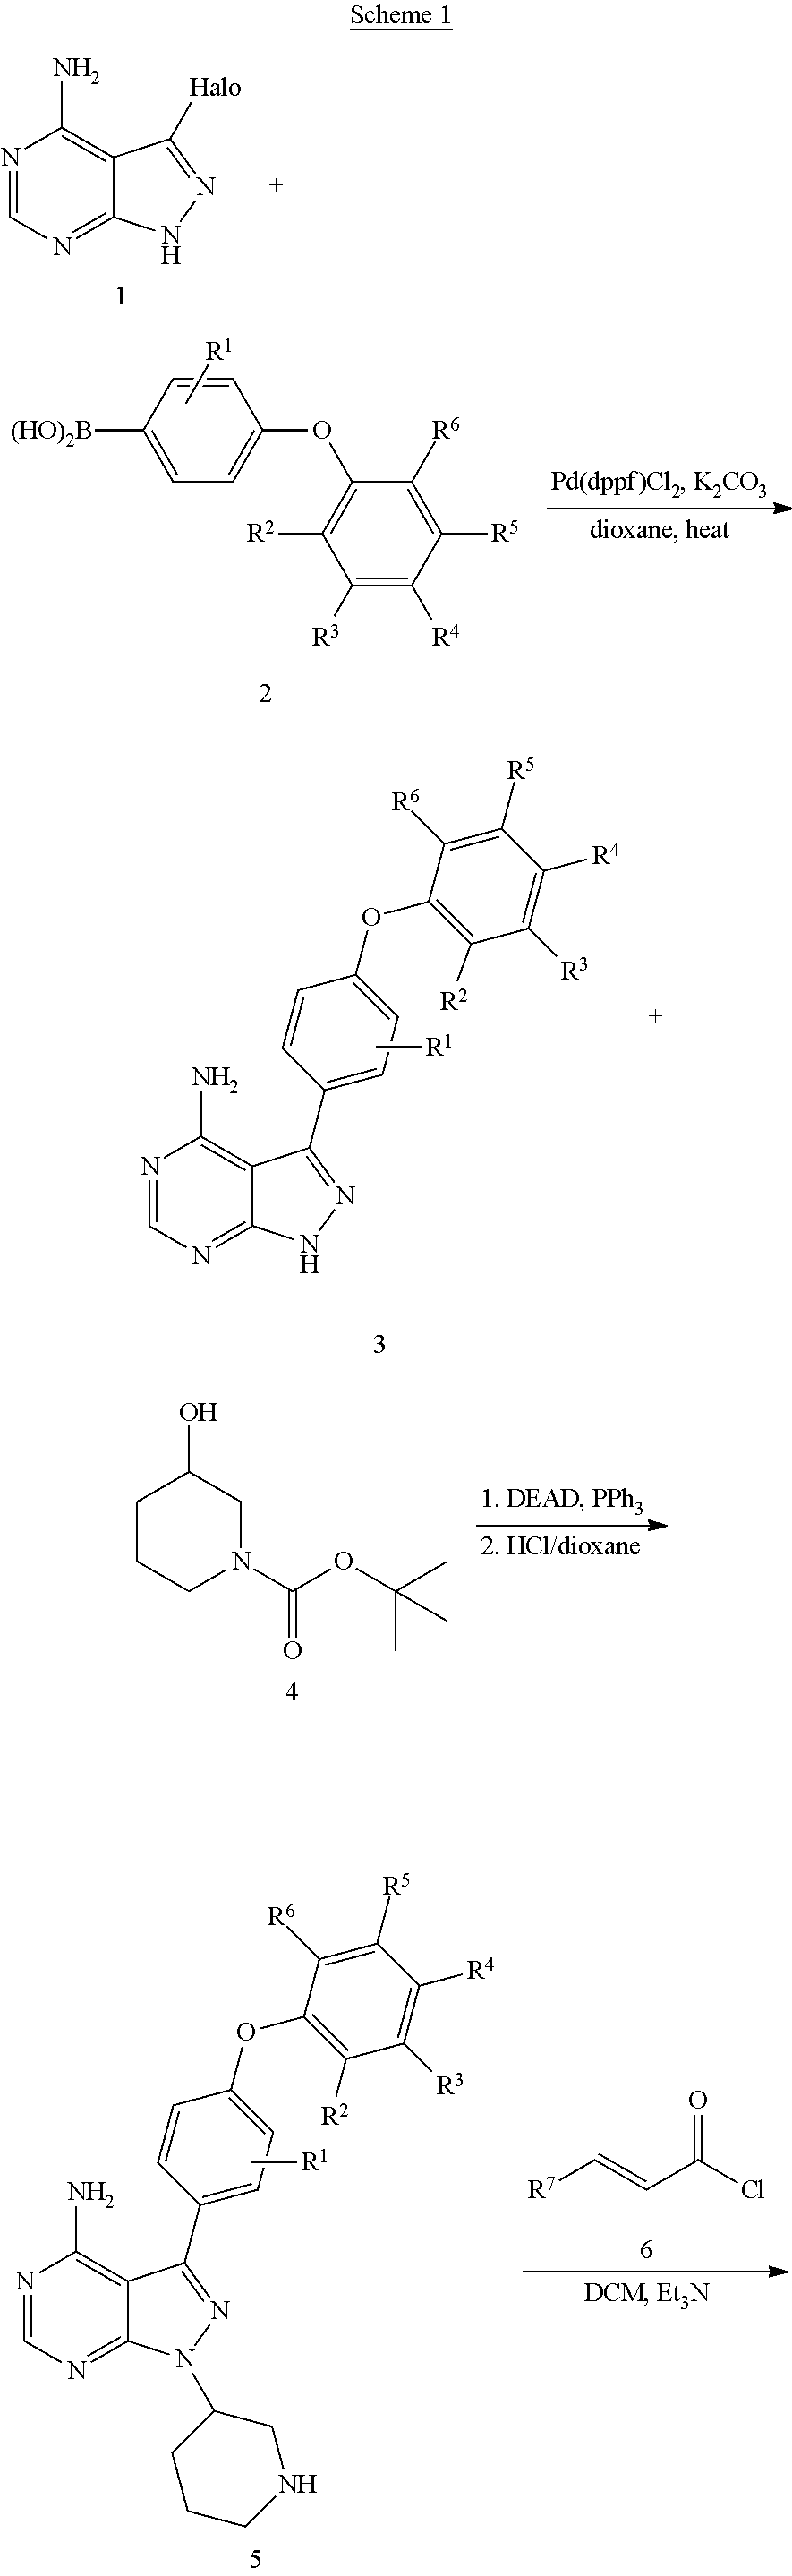 Substituted pyrazolopyrimidines as kinases inhibitors